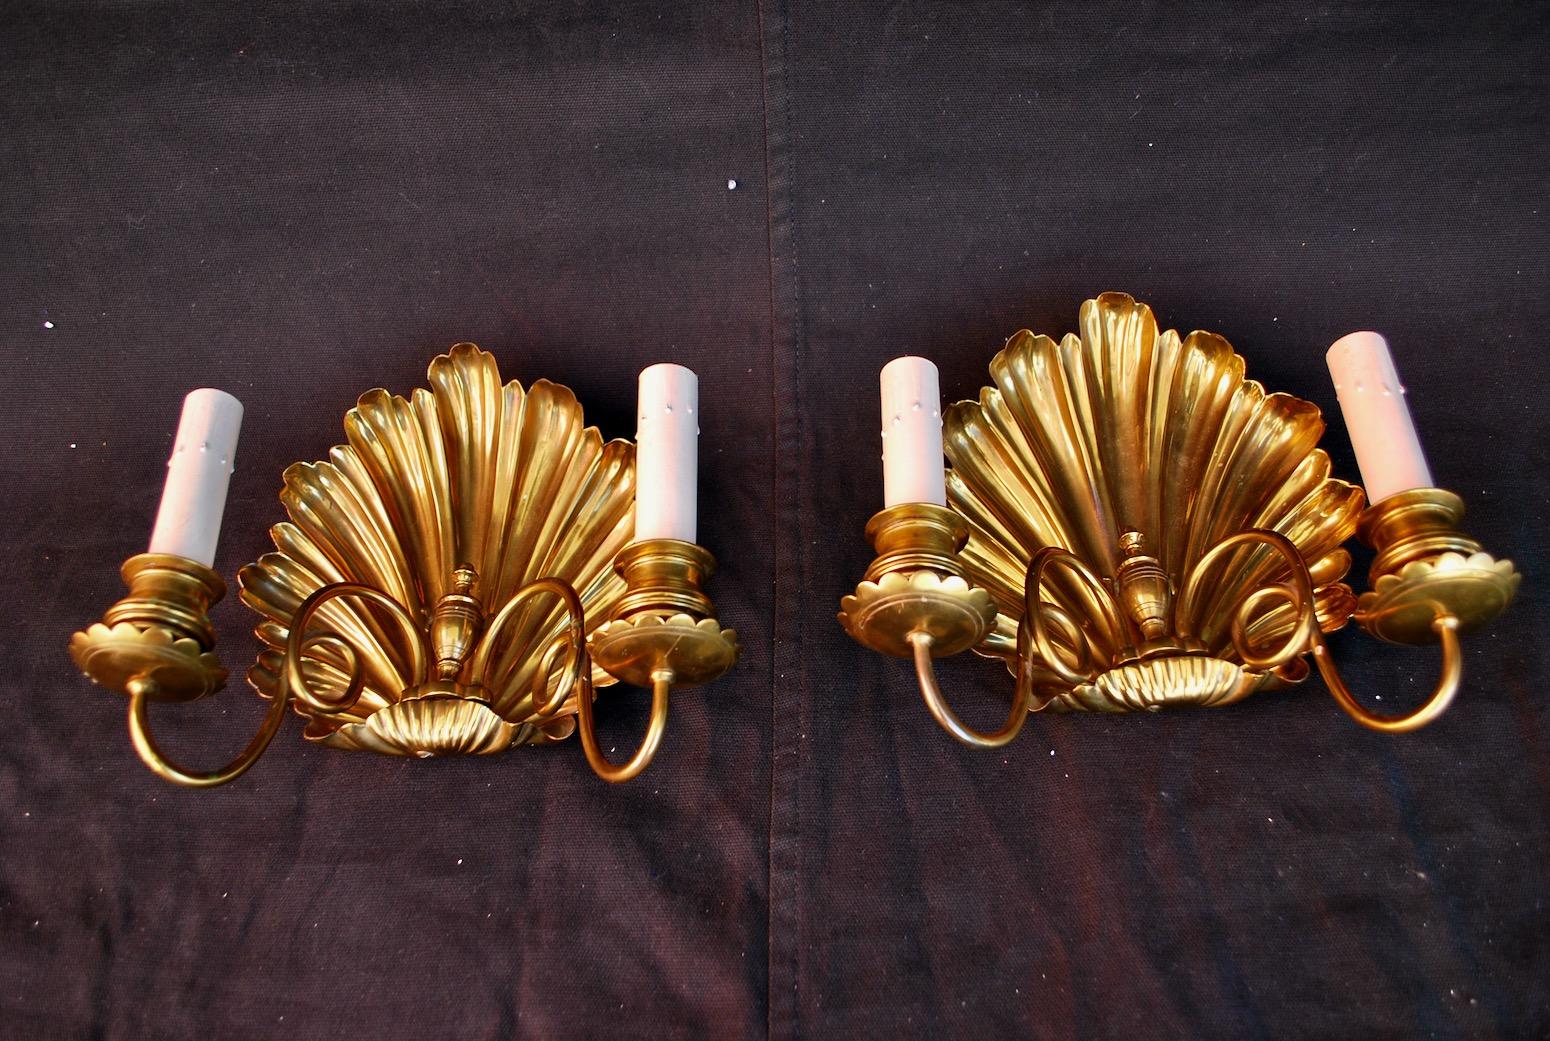 We have over three thousand antique sconces and over one thousand antique lights
A beautiful pair of solid brass late 19th century sconces, originally, they were candles, we are going to electrify them (included), you could hang them with the